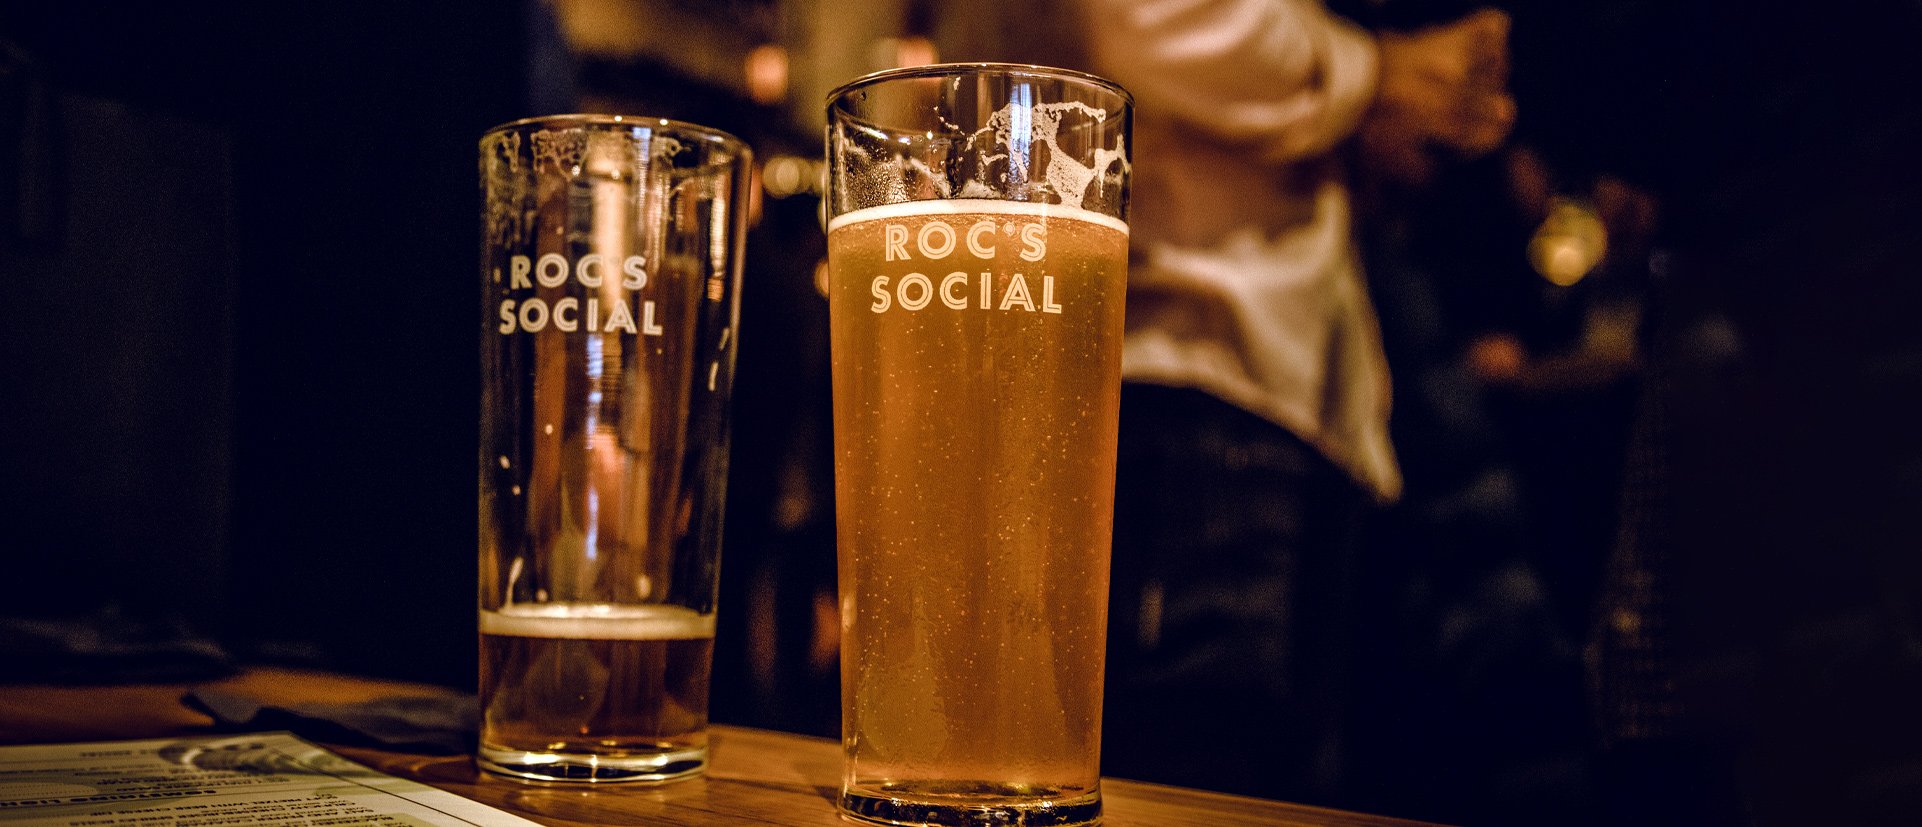 Two beer glasses display the Roc's Social logo